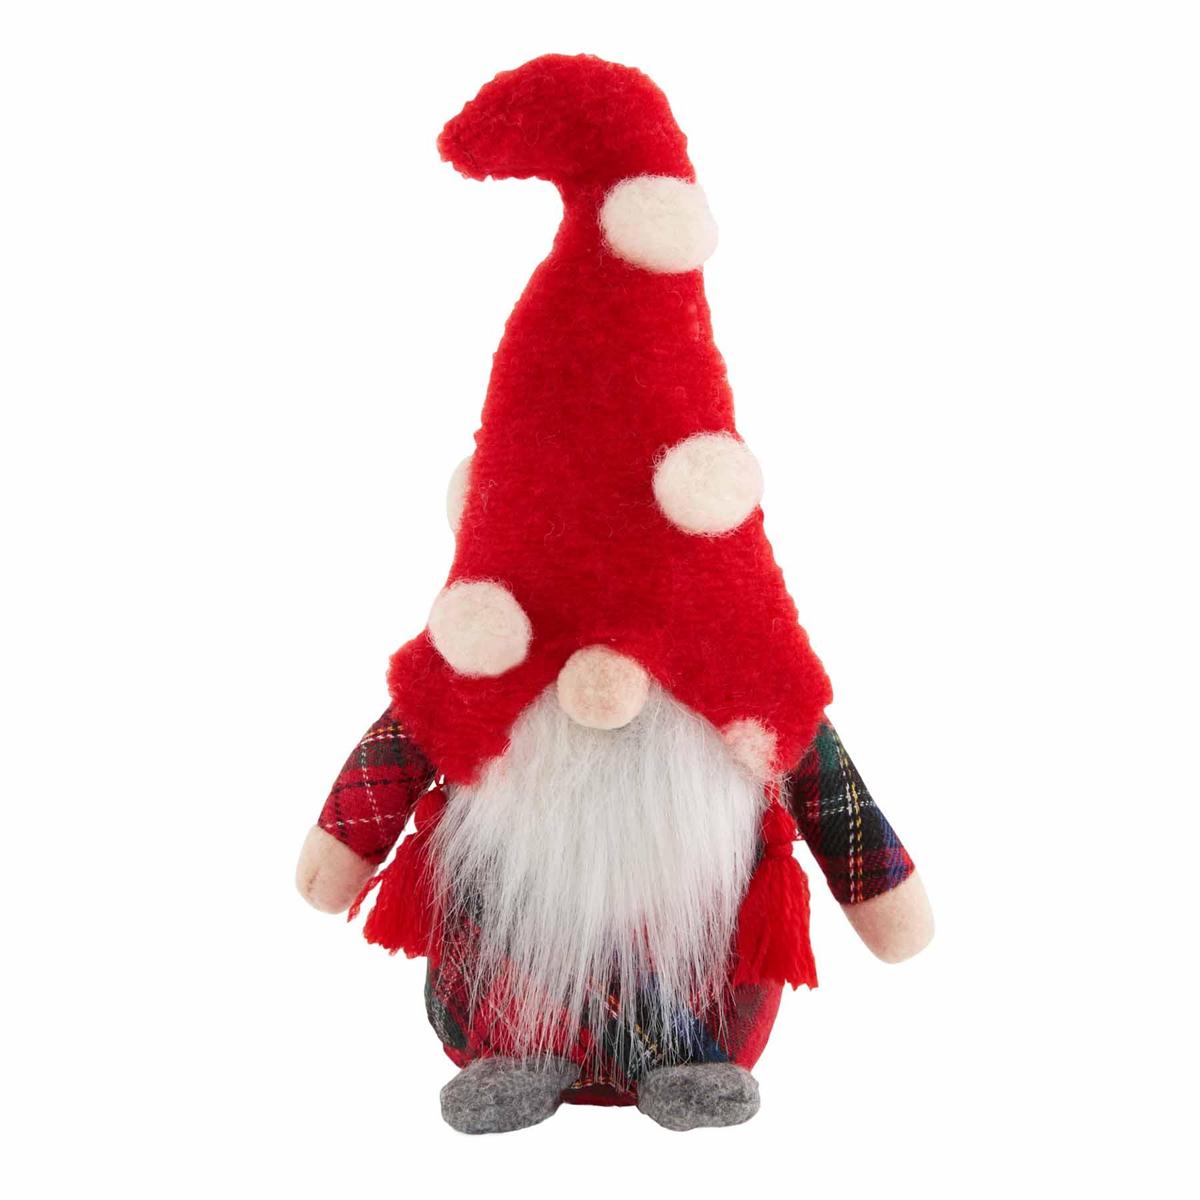 A white bearded gnome with a tartan plaid body, red hat and white cotton balls. Designed by Mud Pie.